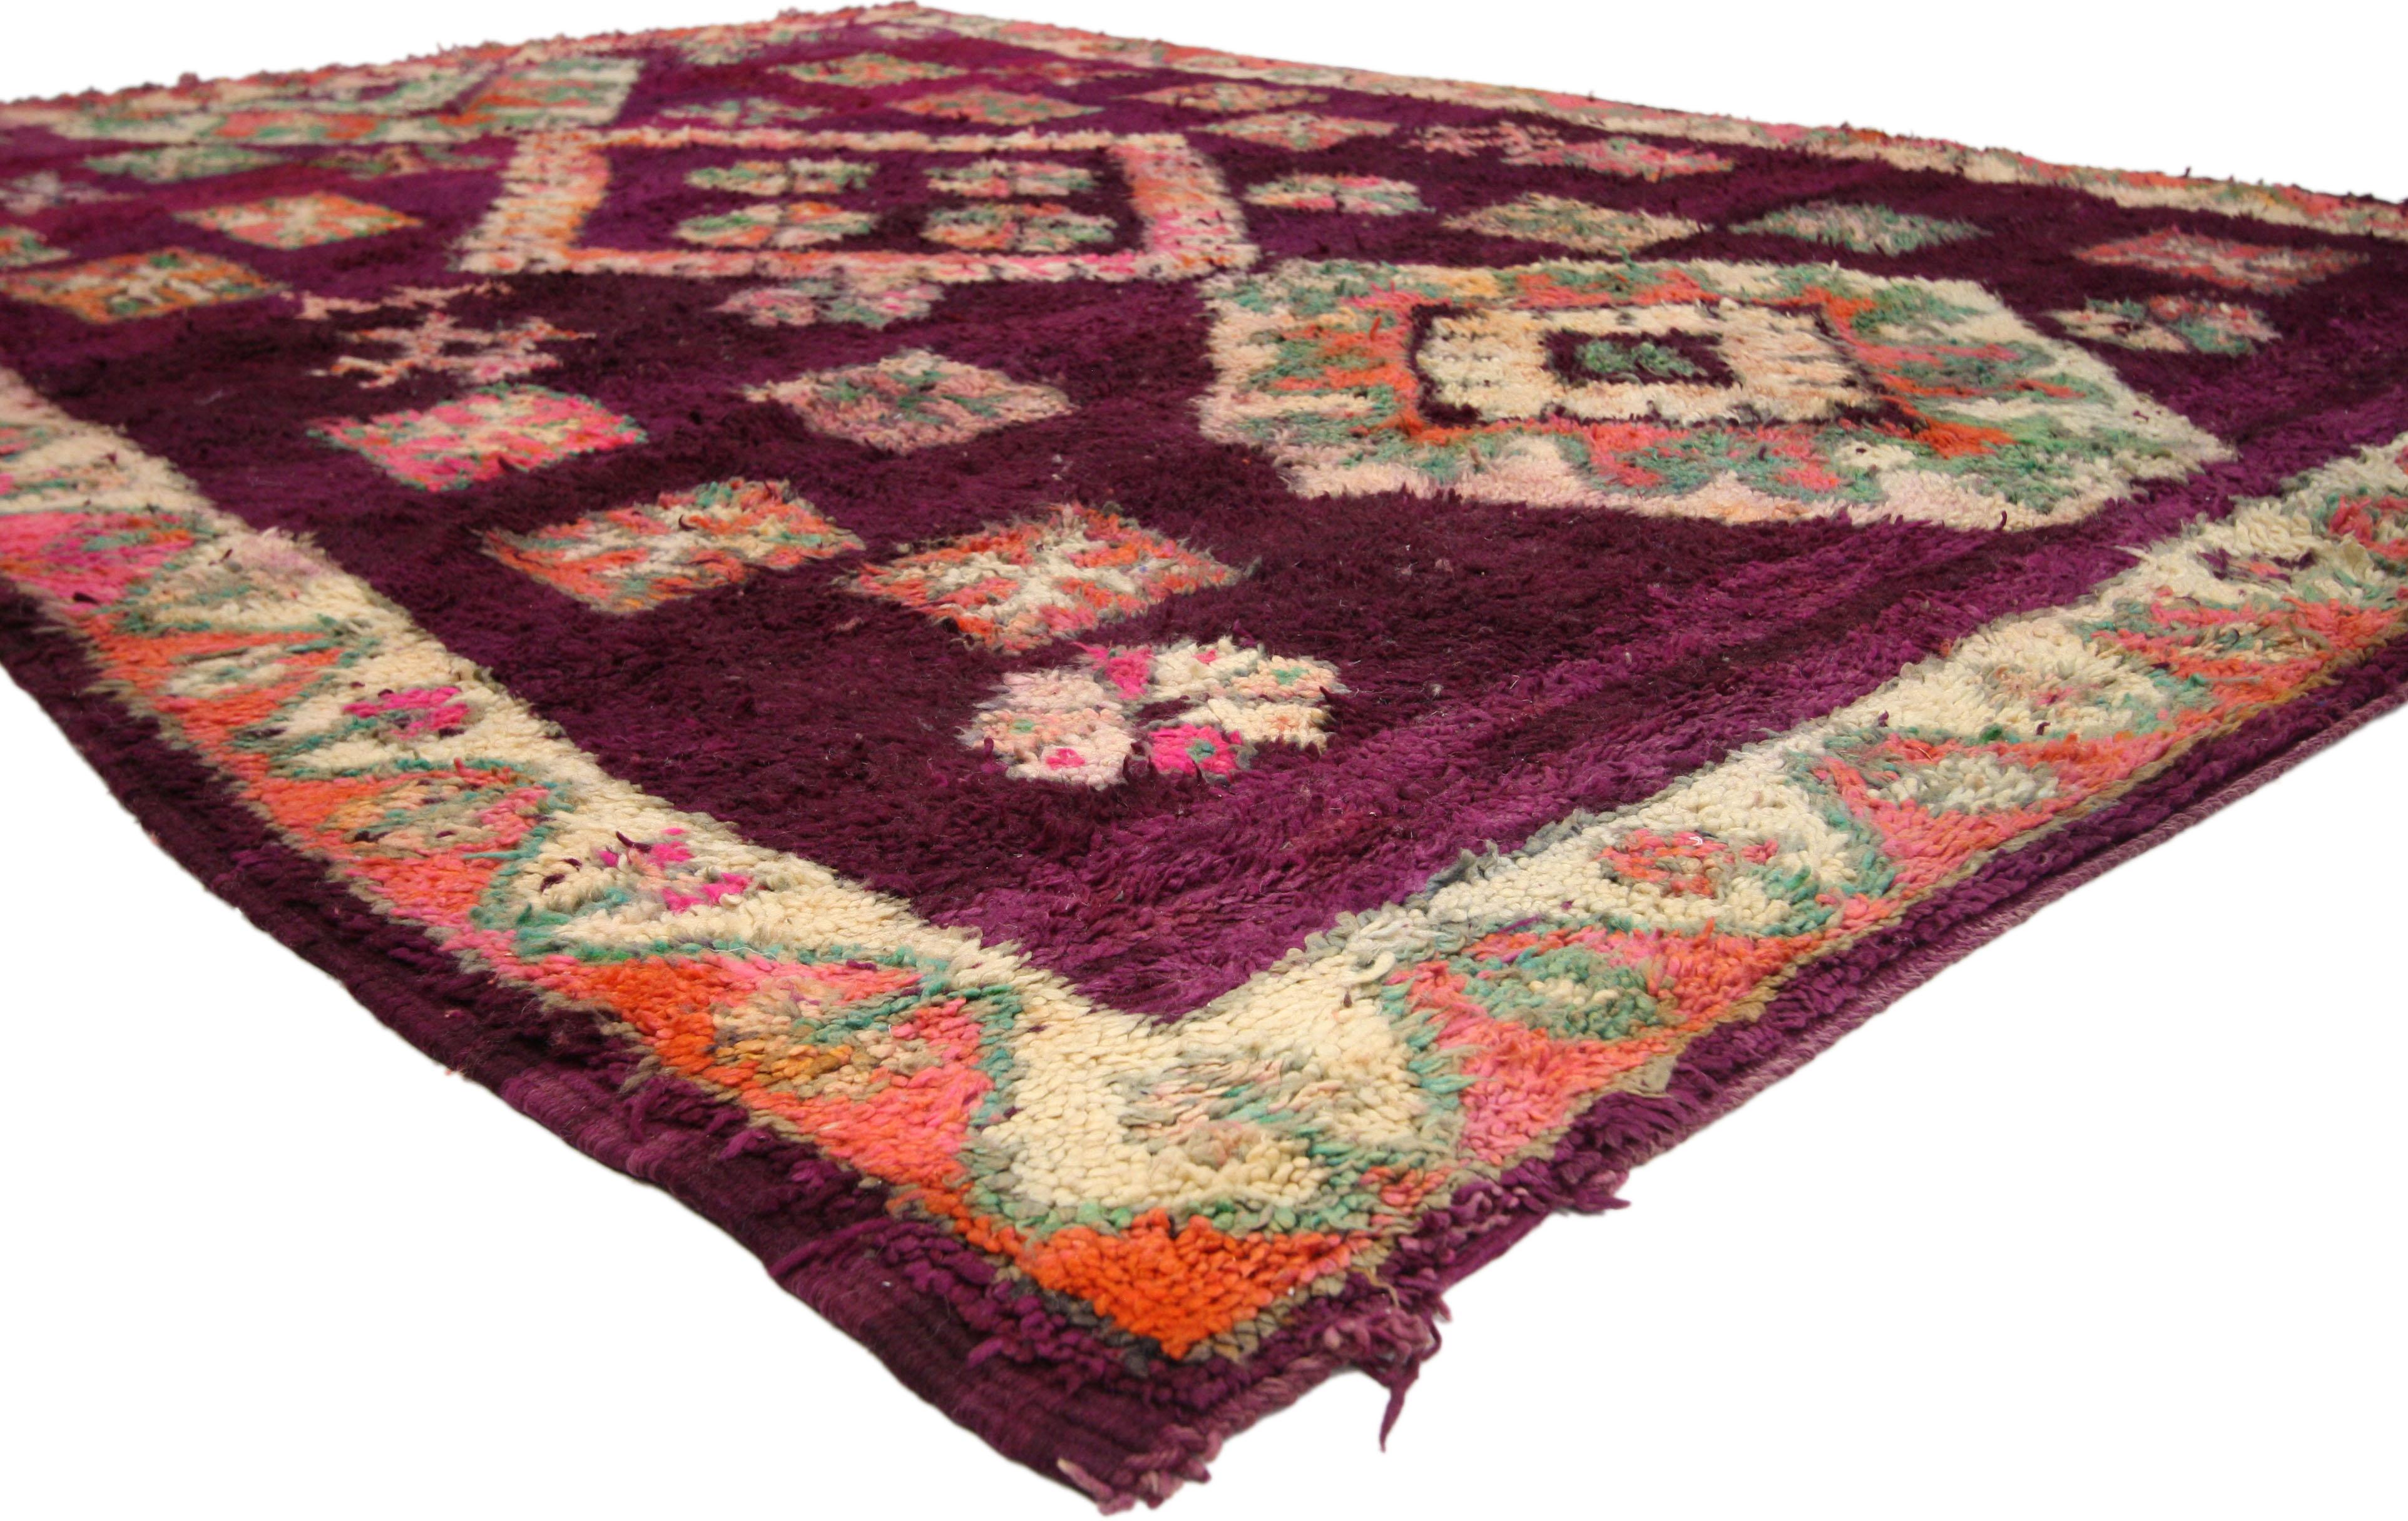 20733, Vintage Moroccan Boujad Rug with Tribal Style, Colorful Moroccan Berber Carpet. This hand-knotted wool vintage Moroccan Boujad rug hosts various reproductive and protection symbols that carry great meaning in Ancient Berber culture. Taking